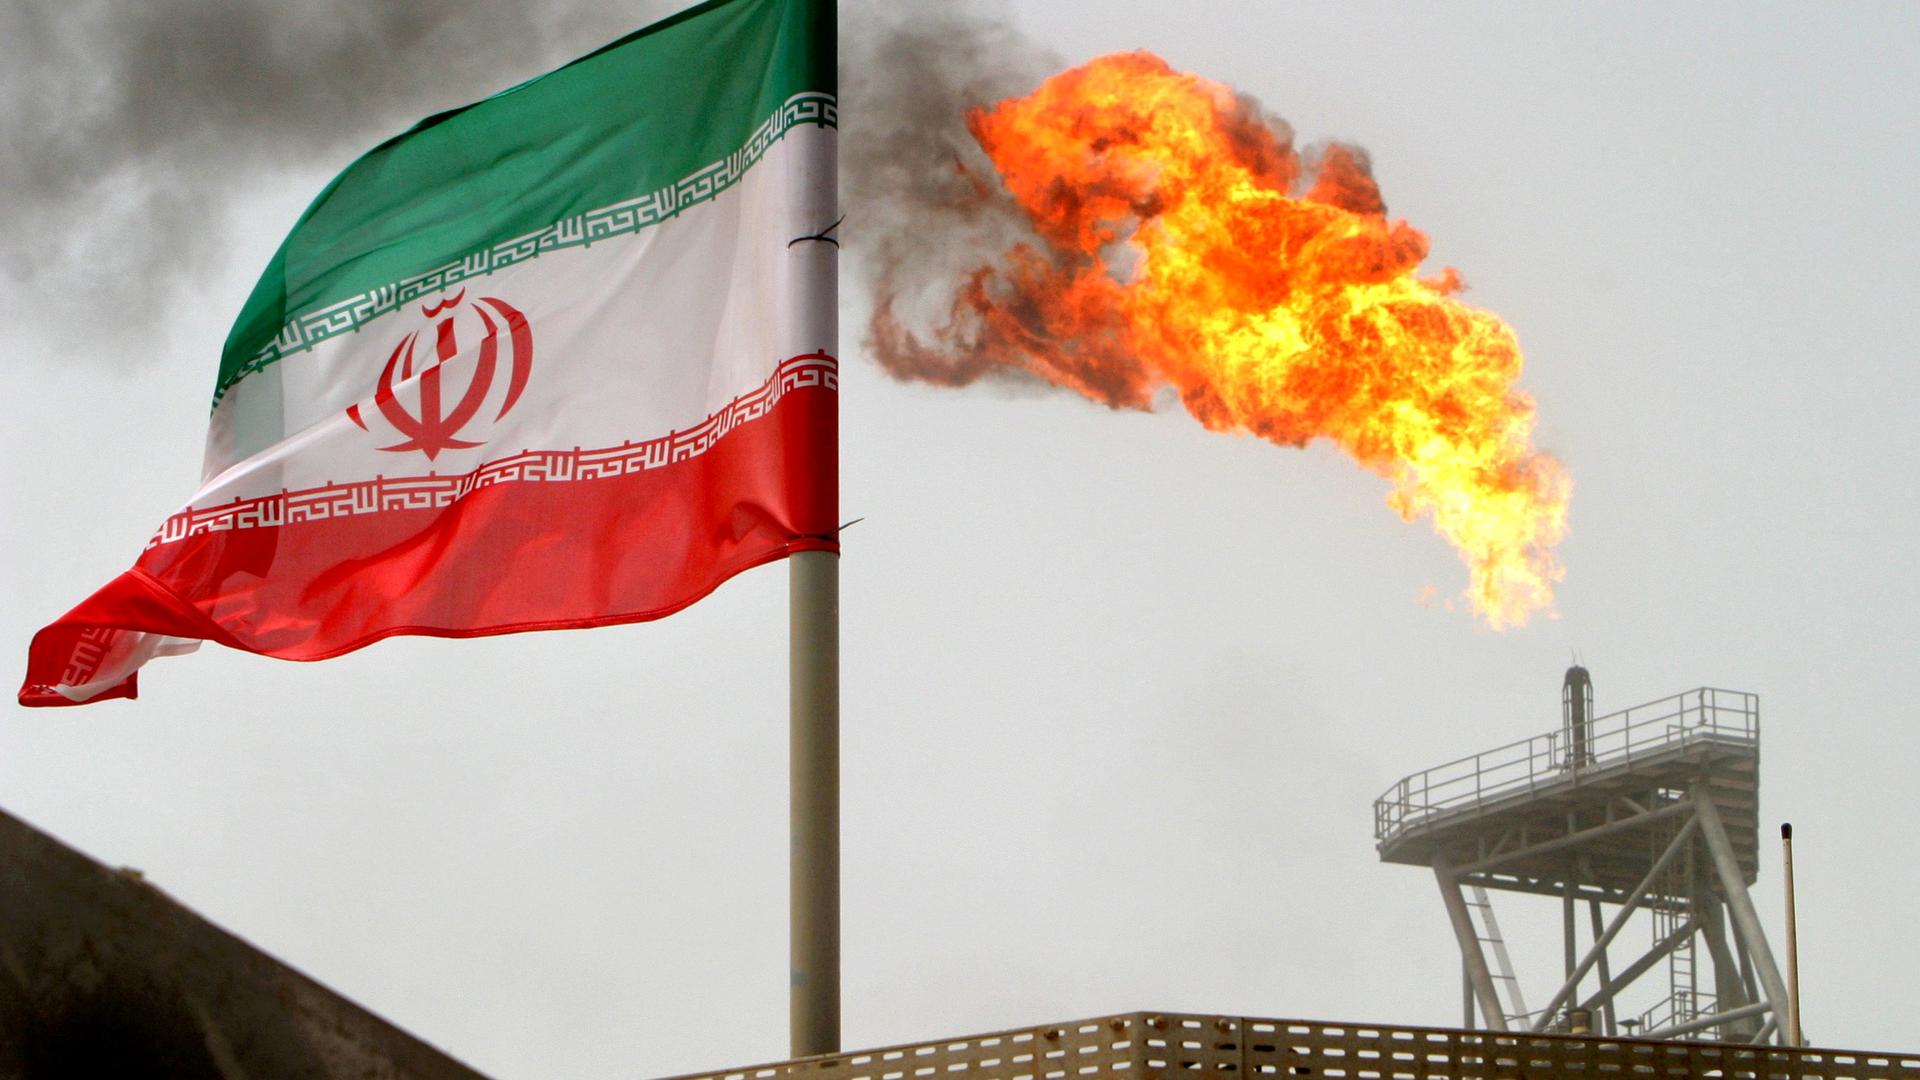 A gas flare is seen in the background with the Iranian flag flying in the wind in the foreground.